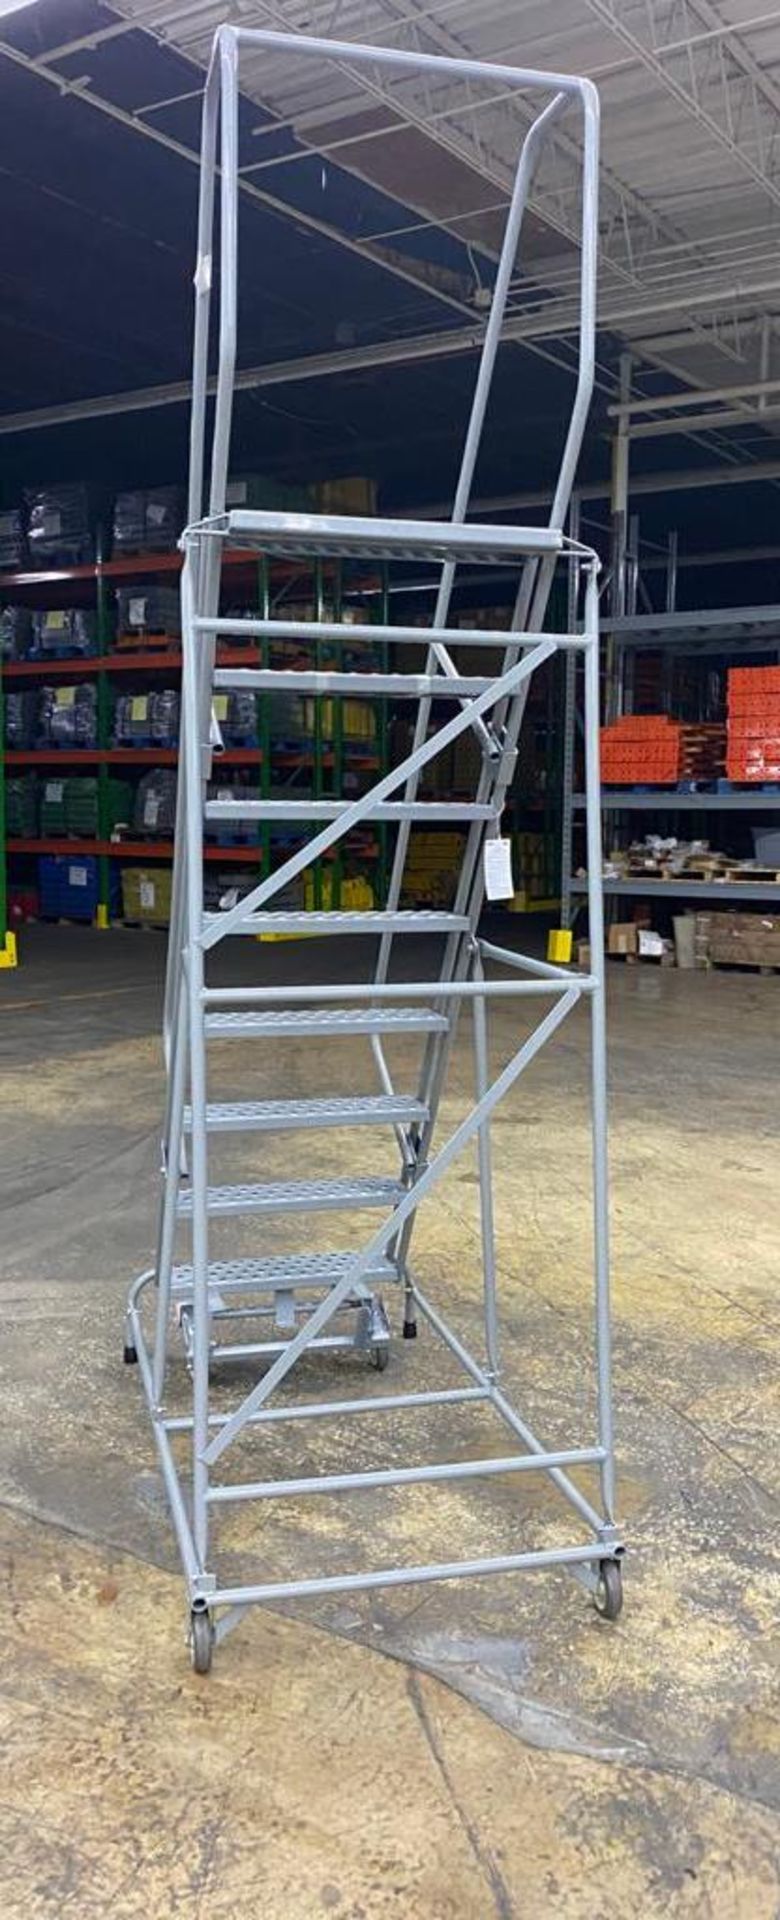 NEW 8 STEP ROLLING LADDER - Image 4 of 4